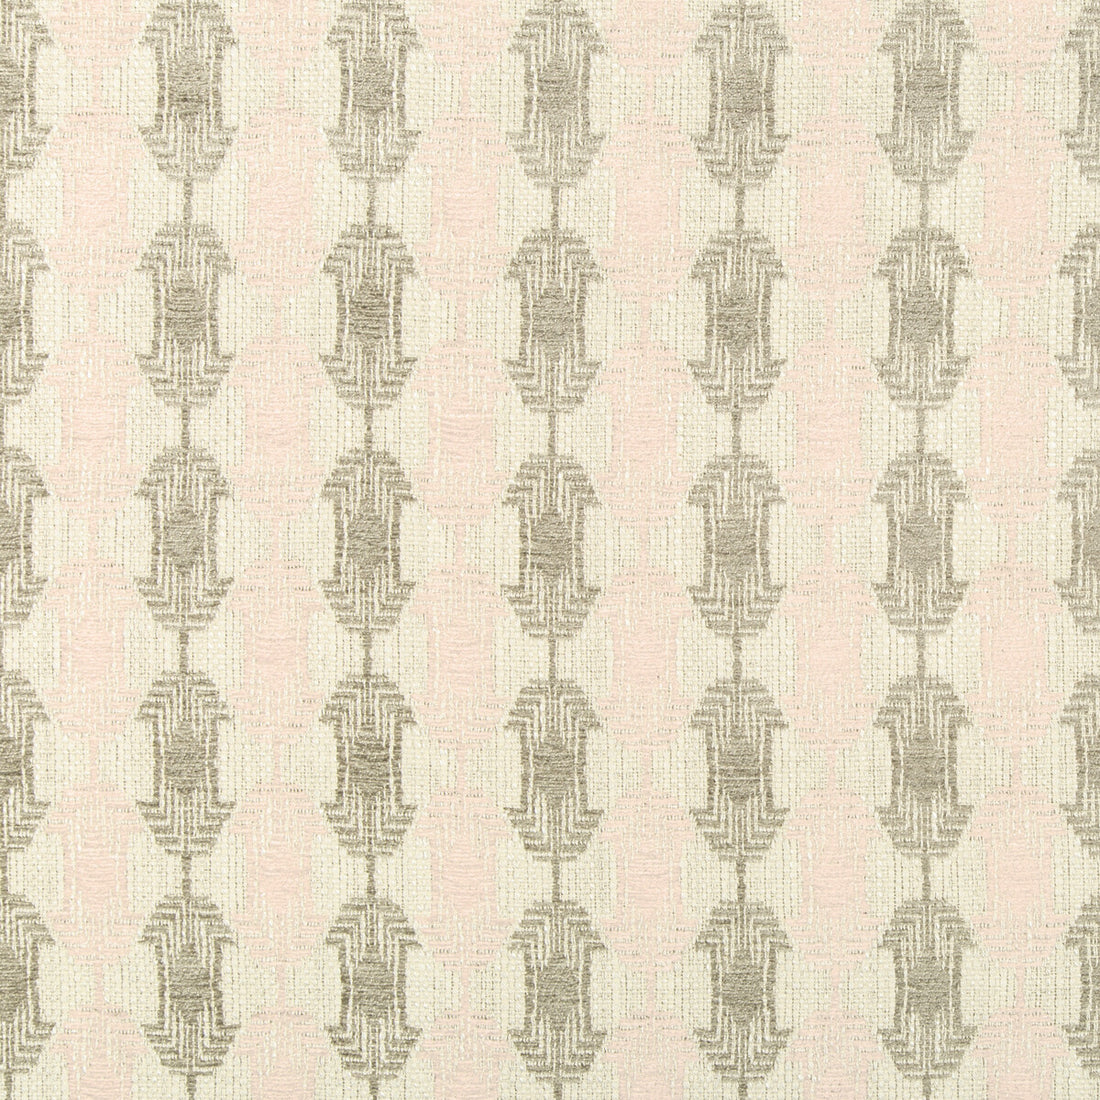 Quartz Weave fabric in rose color - pattern GWF-3751.7.0 - by Lee Jofa Modern in the Gems collection